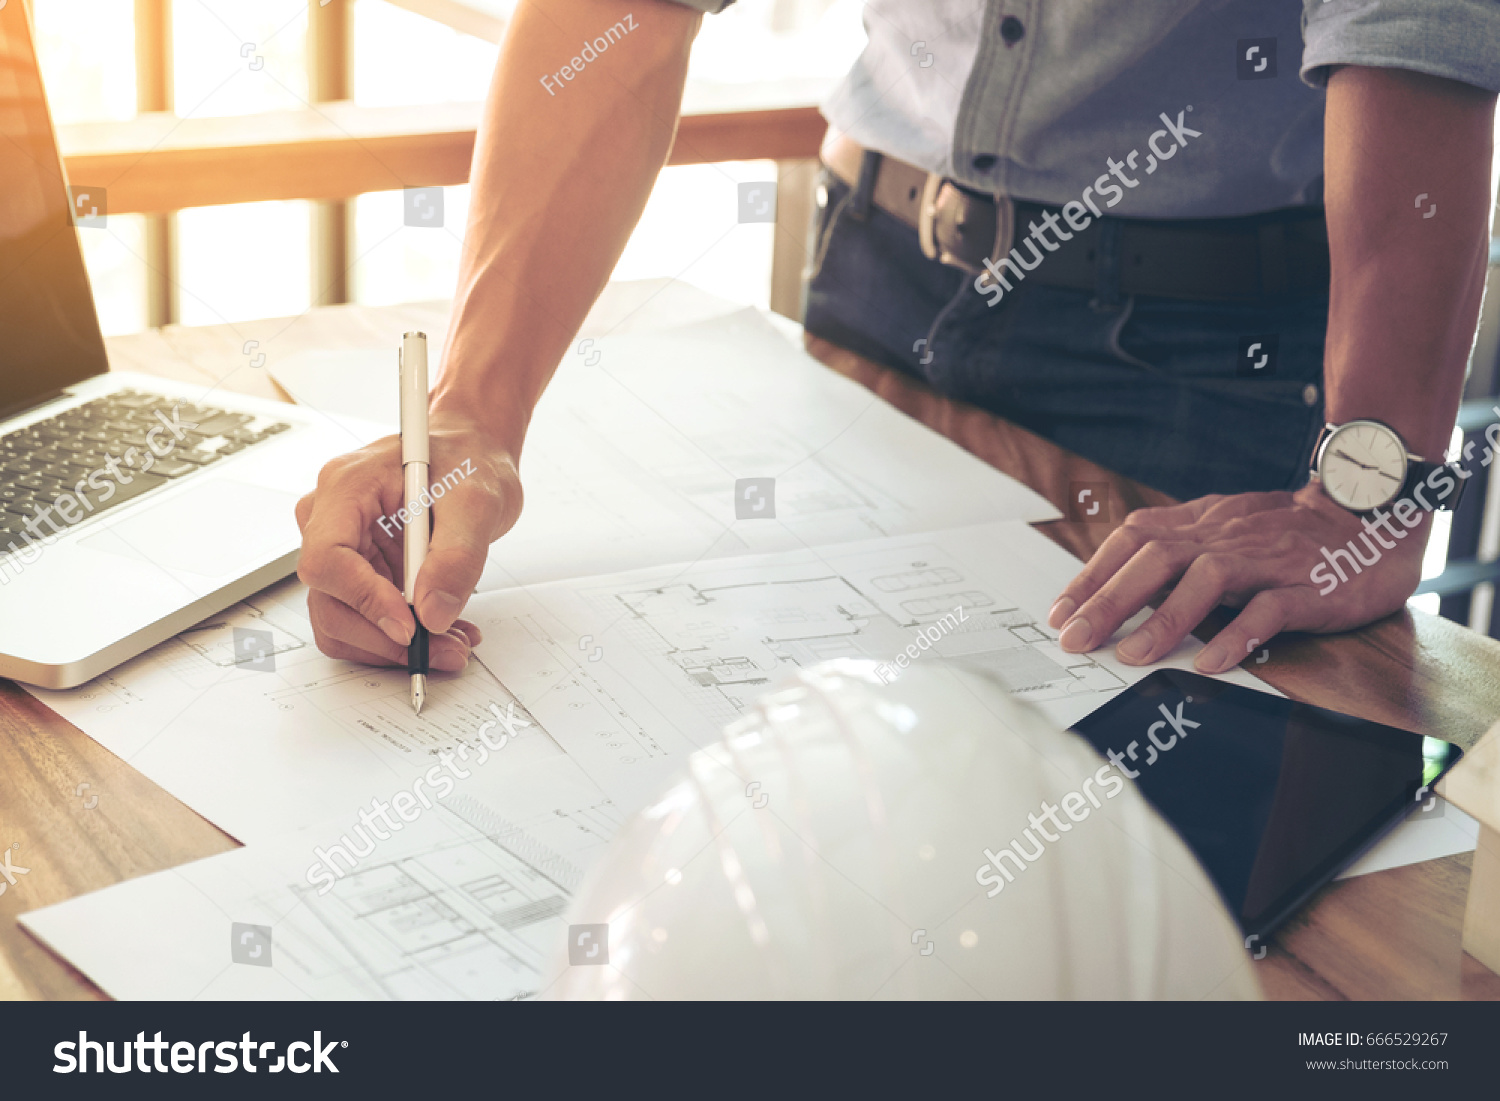 Image of engineer or architectural project, Close up of engineer's hand drawing plan on BluePrint with Engineering tools on workplace. #666529267